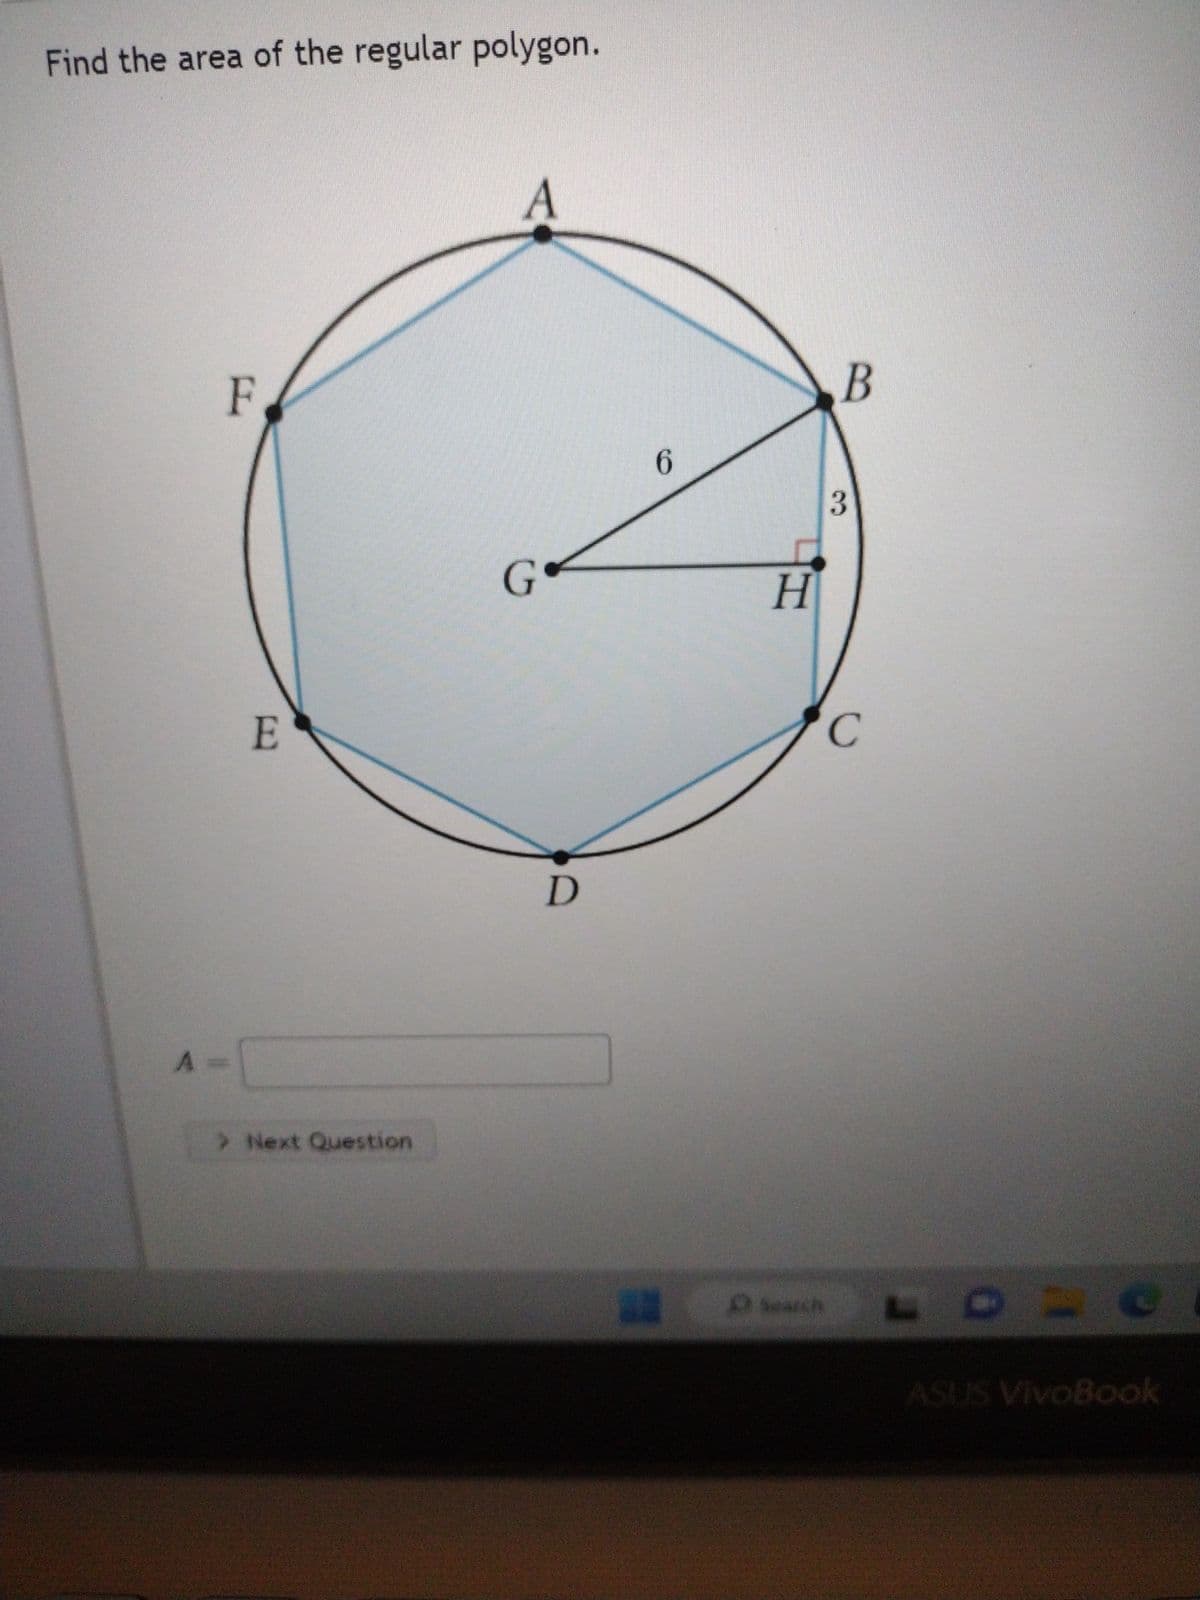 Find the area of the regular polygon.
A
F
E
> Next Question
A
G
D
6
H
O search
B
3
C
ASUS VivoBook